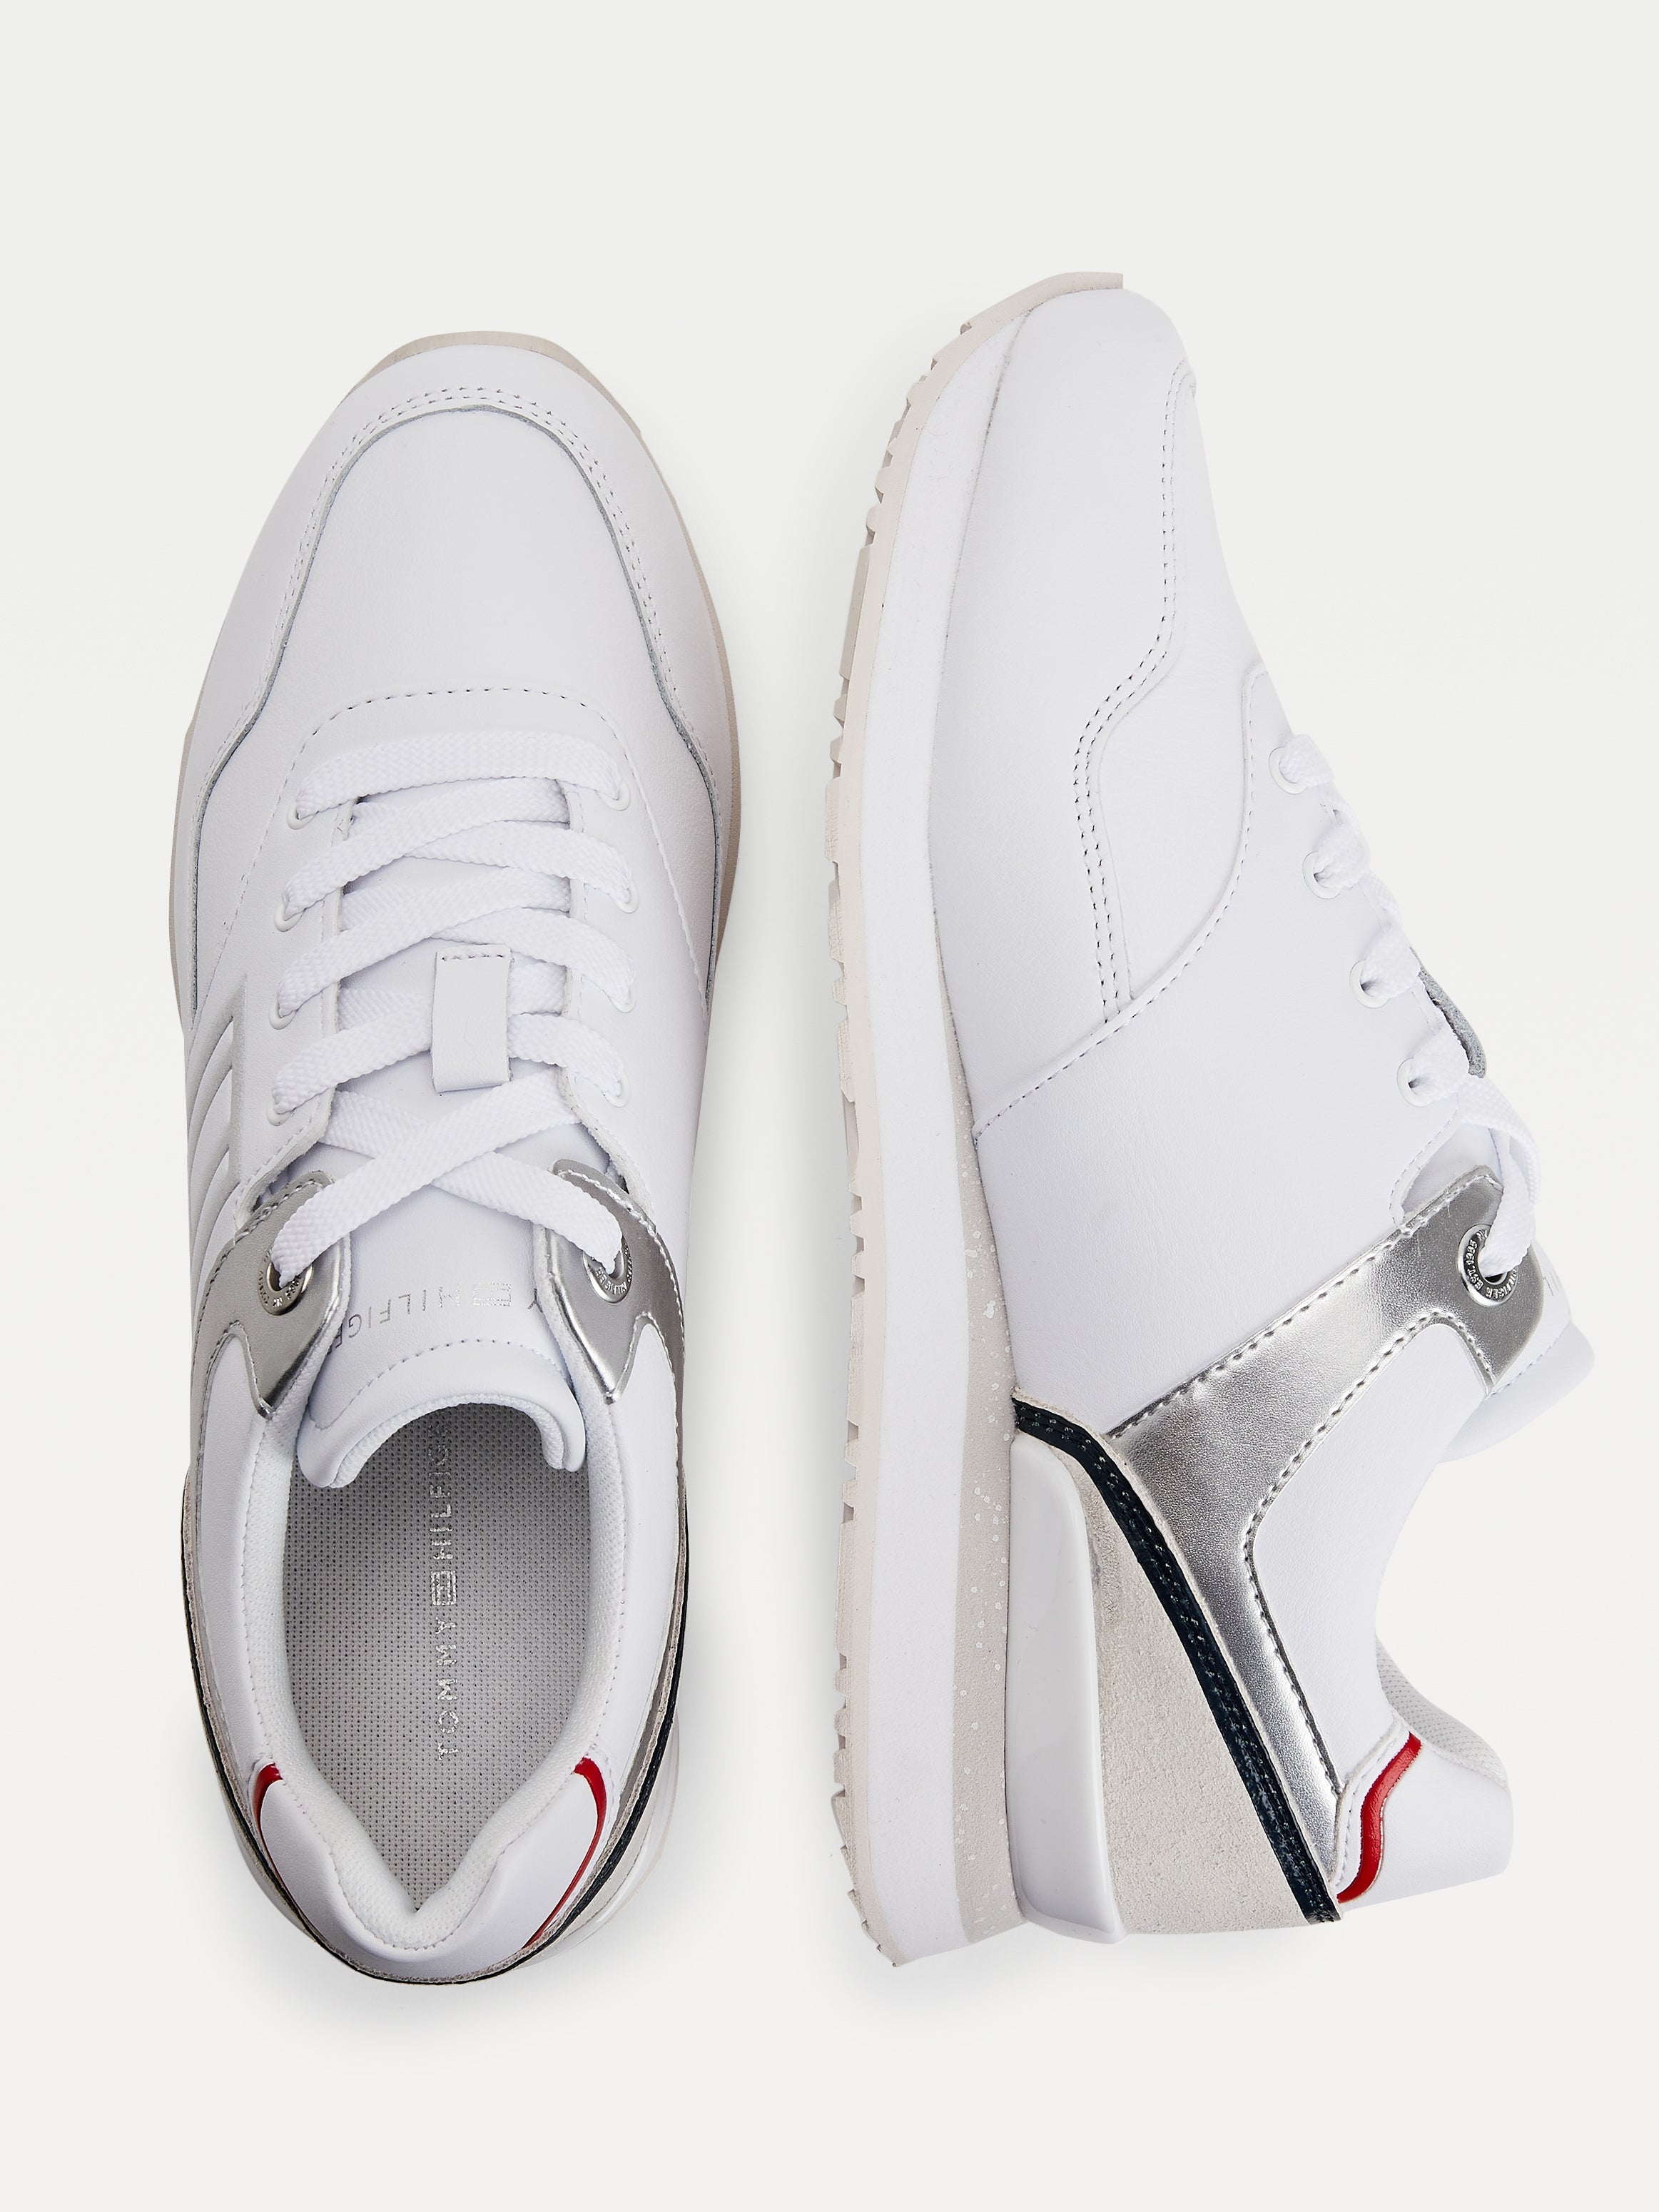 Tommy Hilfiger Casual City Trainer